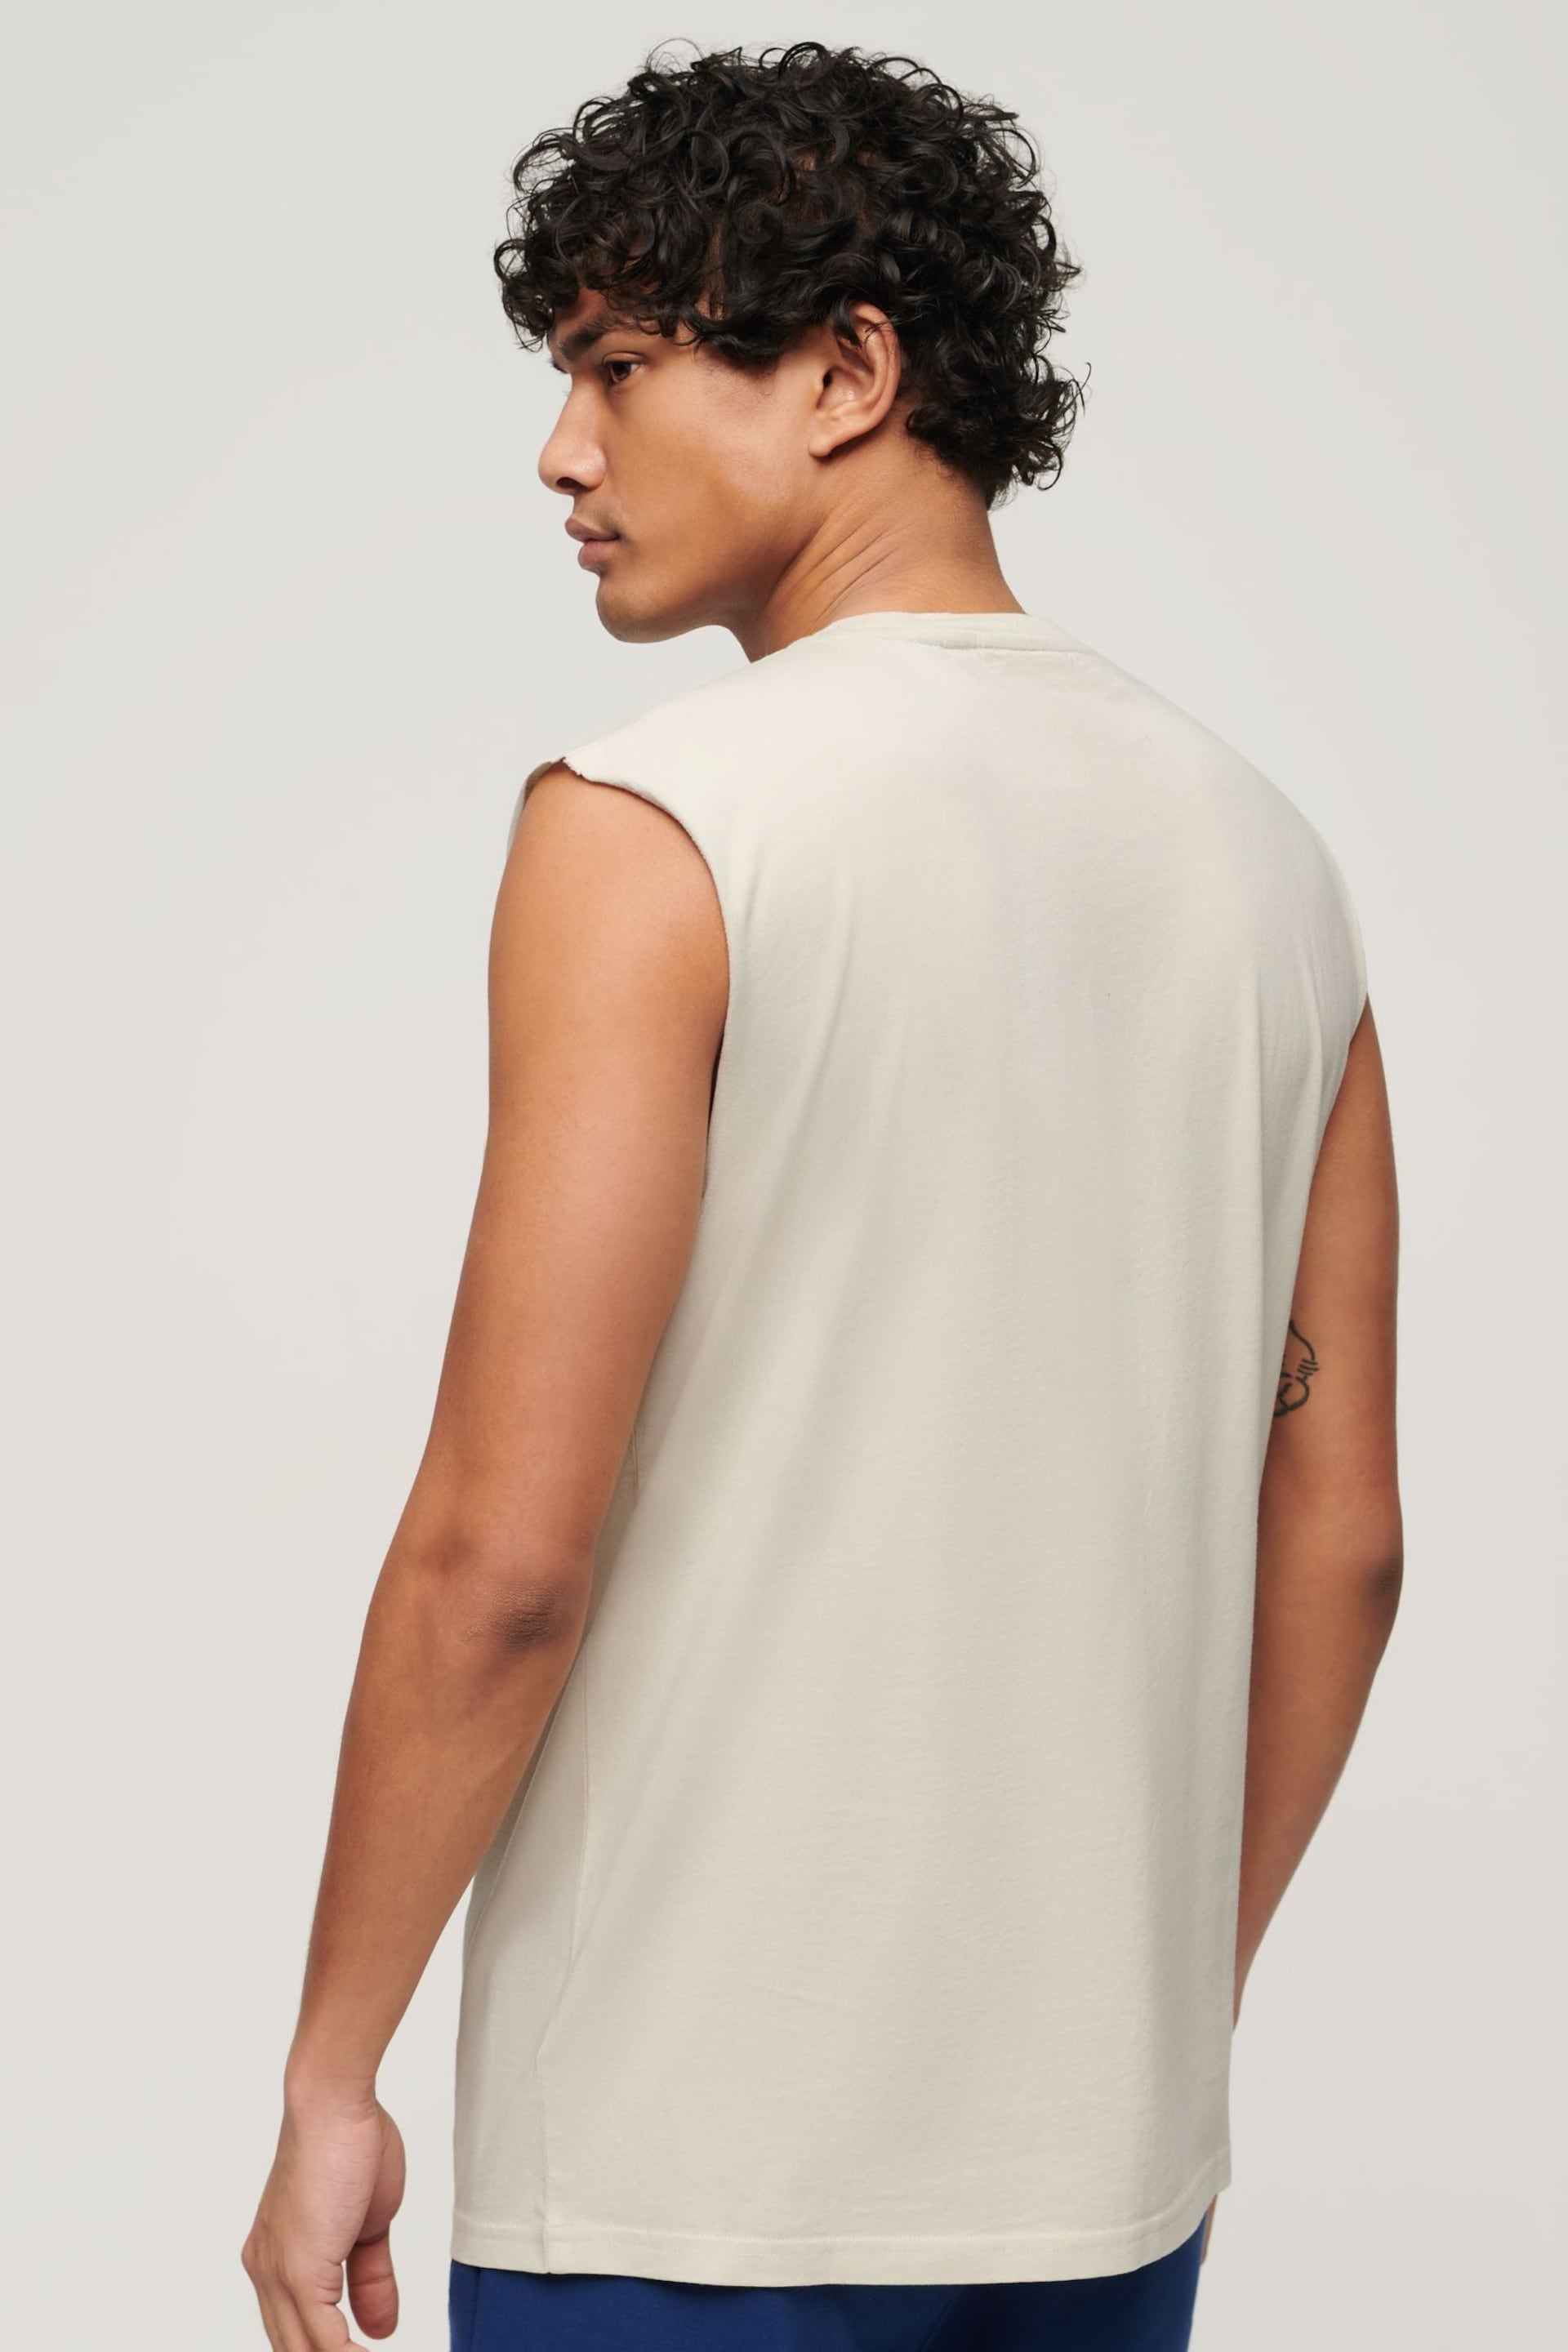 Superdry White Essential Logo Tank - Image 2 of 6